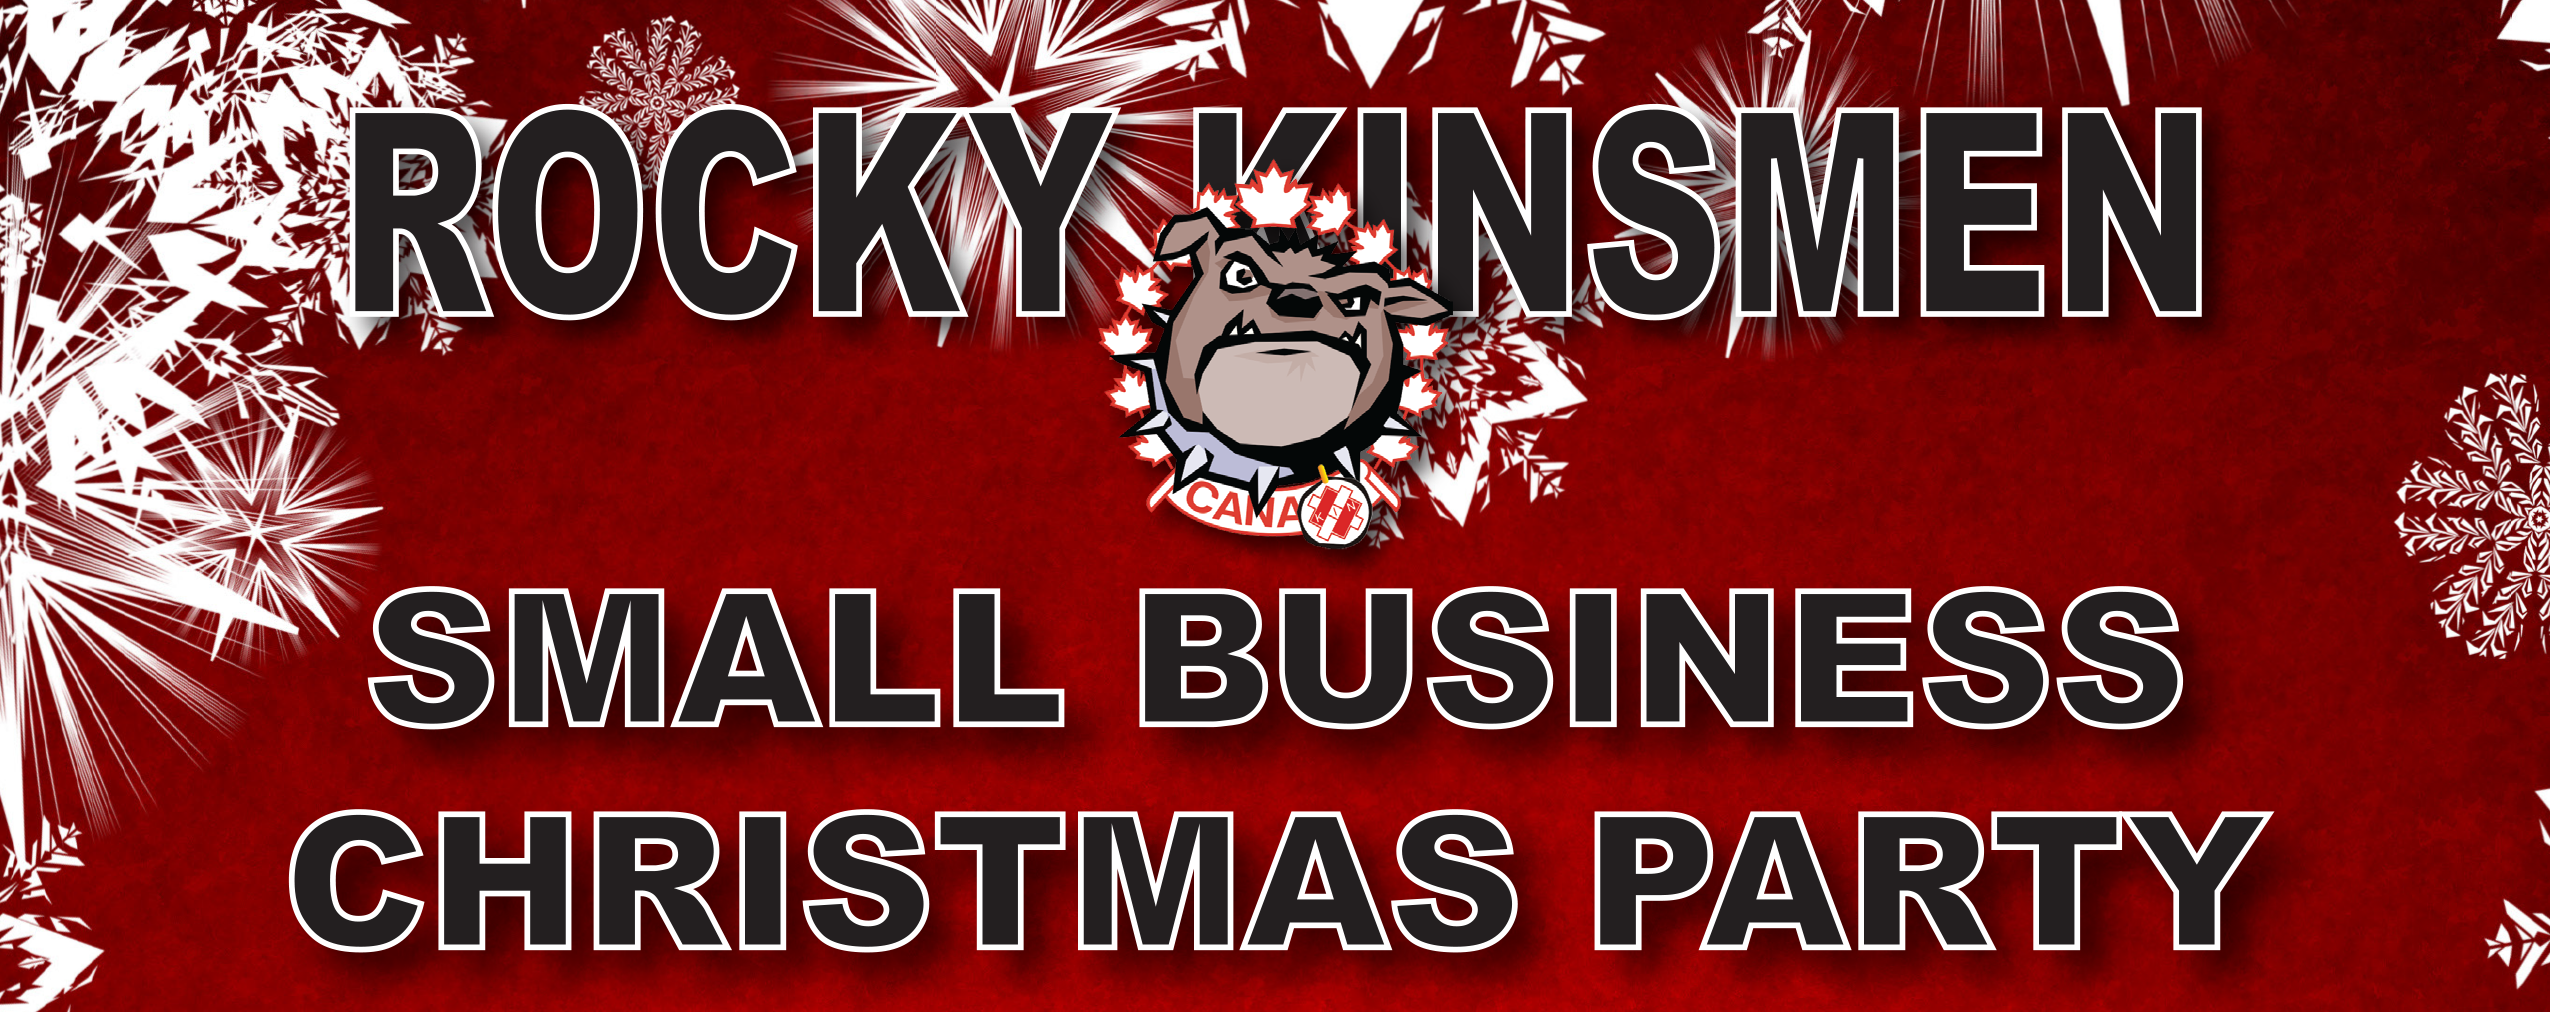 2017 Small Business Christmas Party